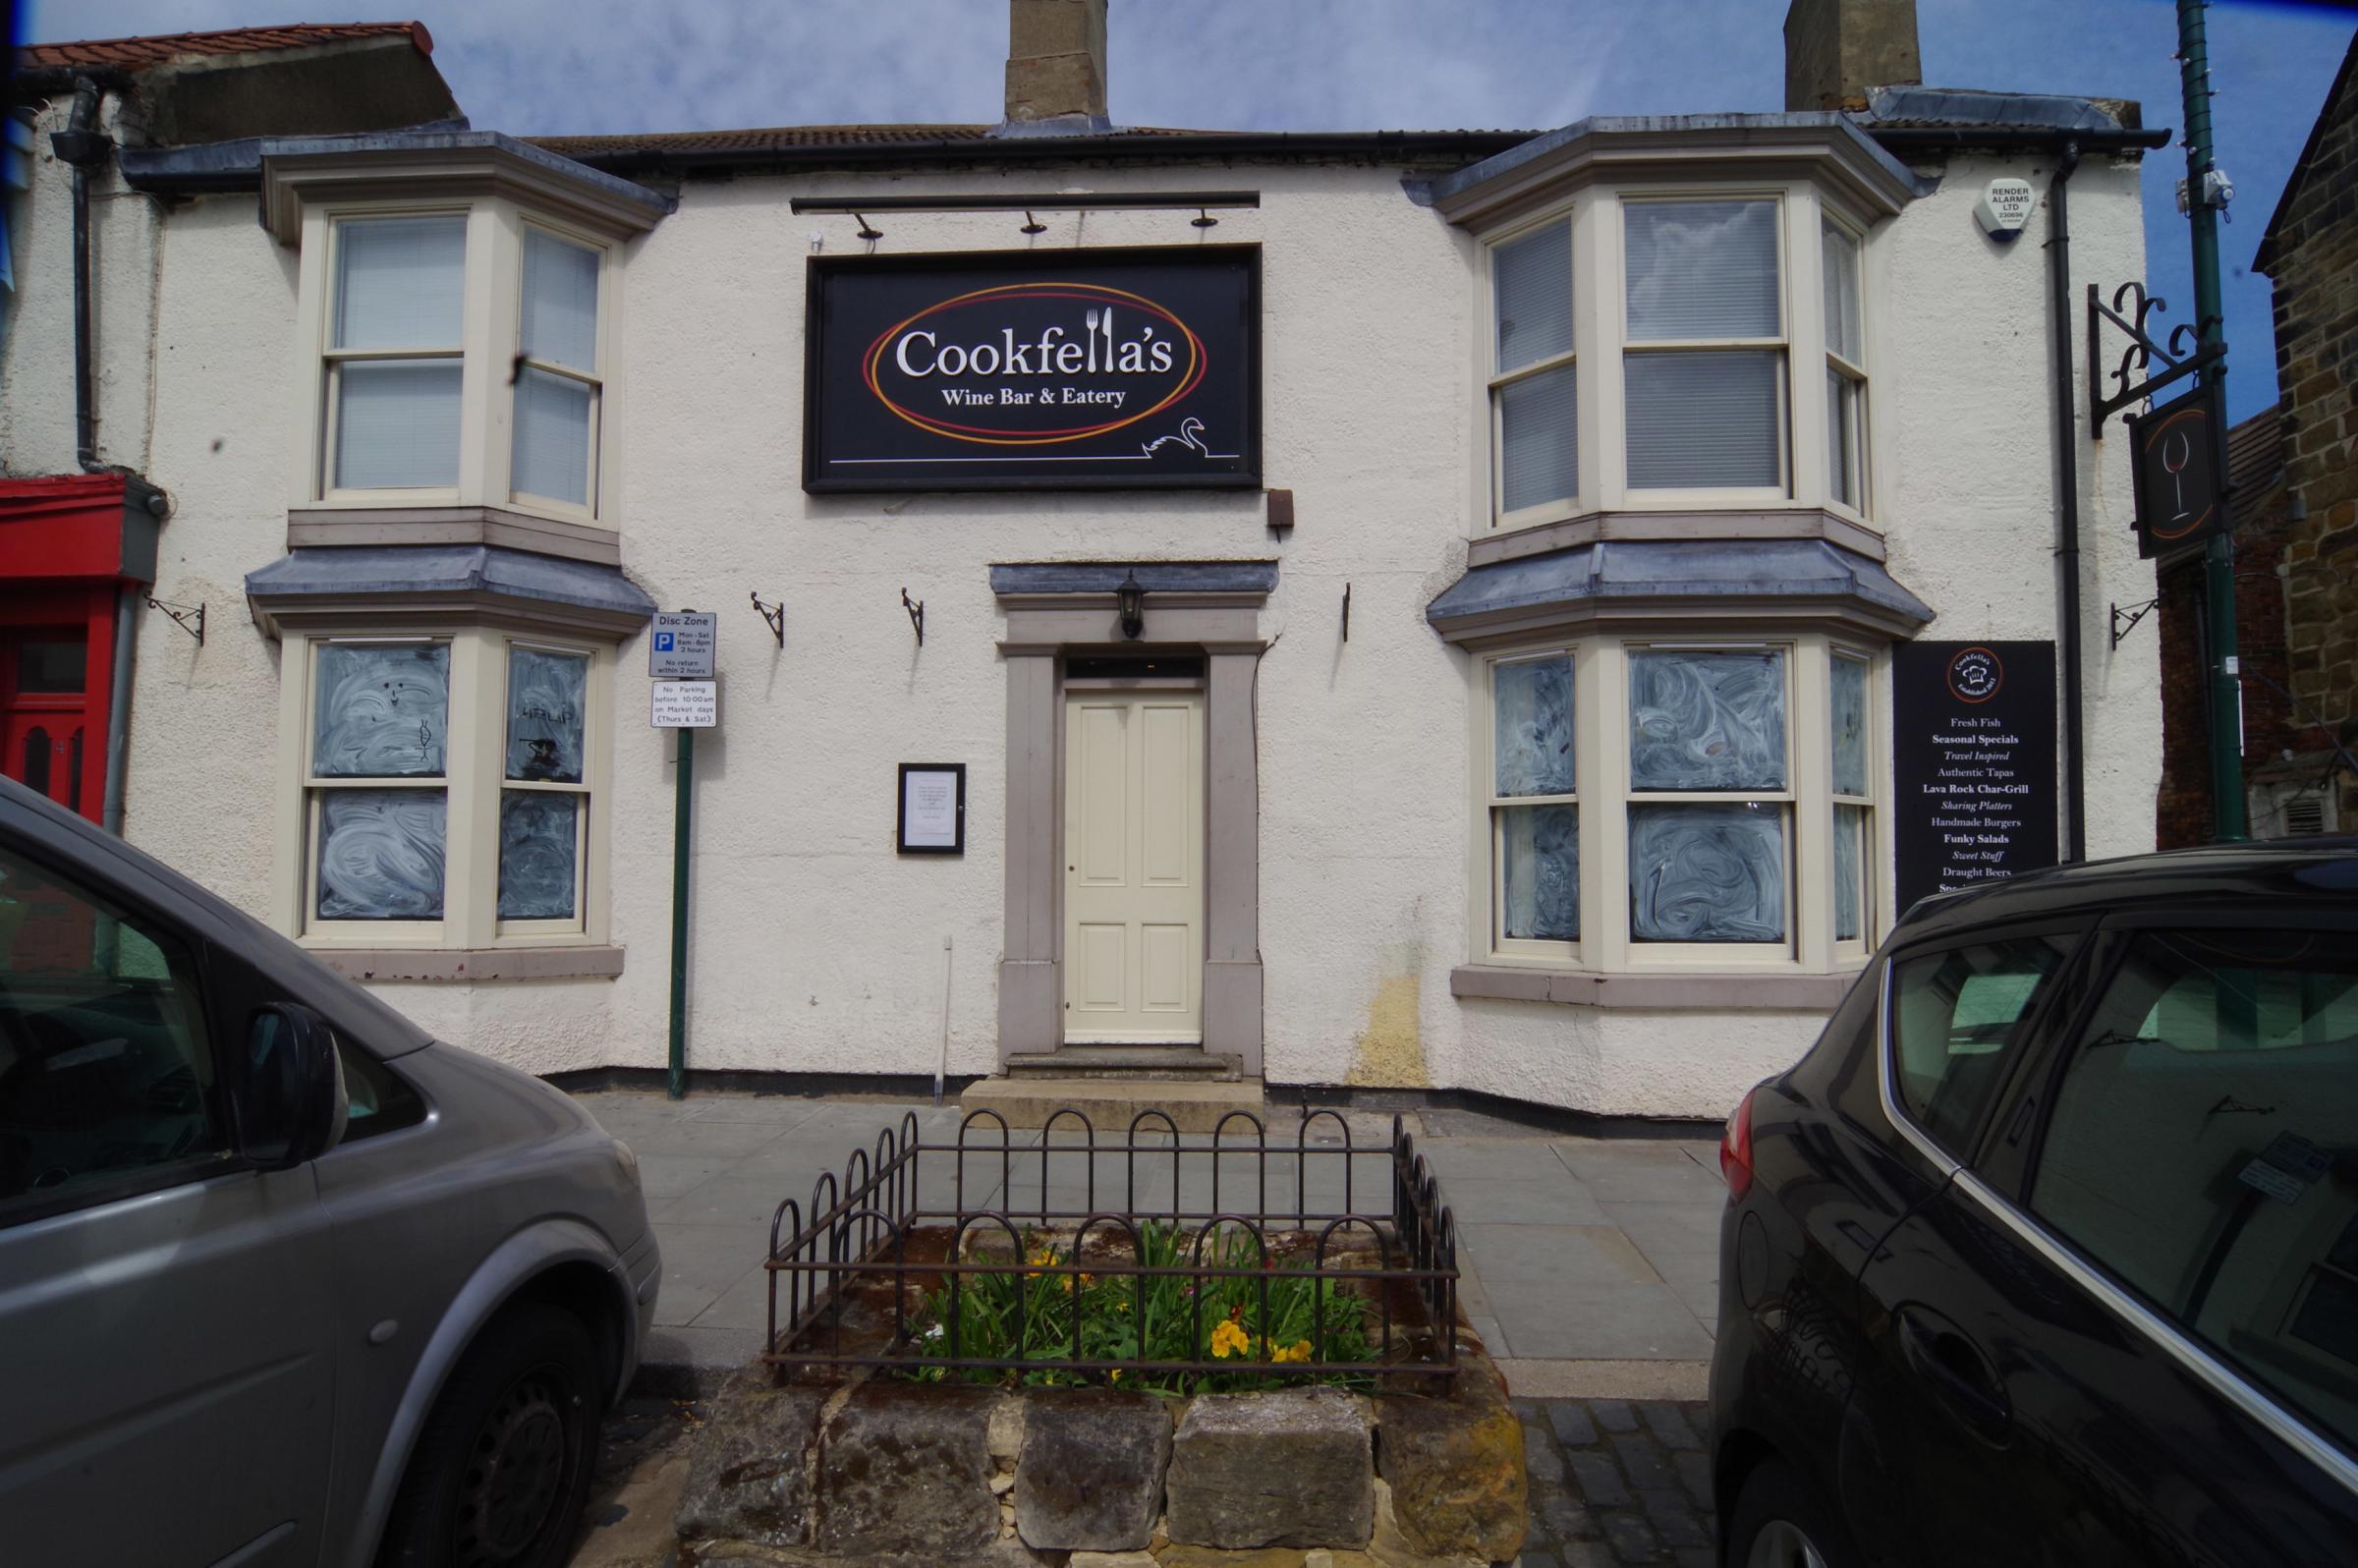 The front of the old pub, now Cookfellas Restaurant